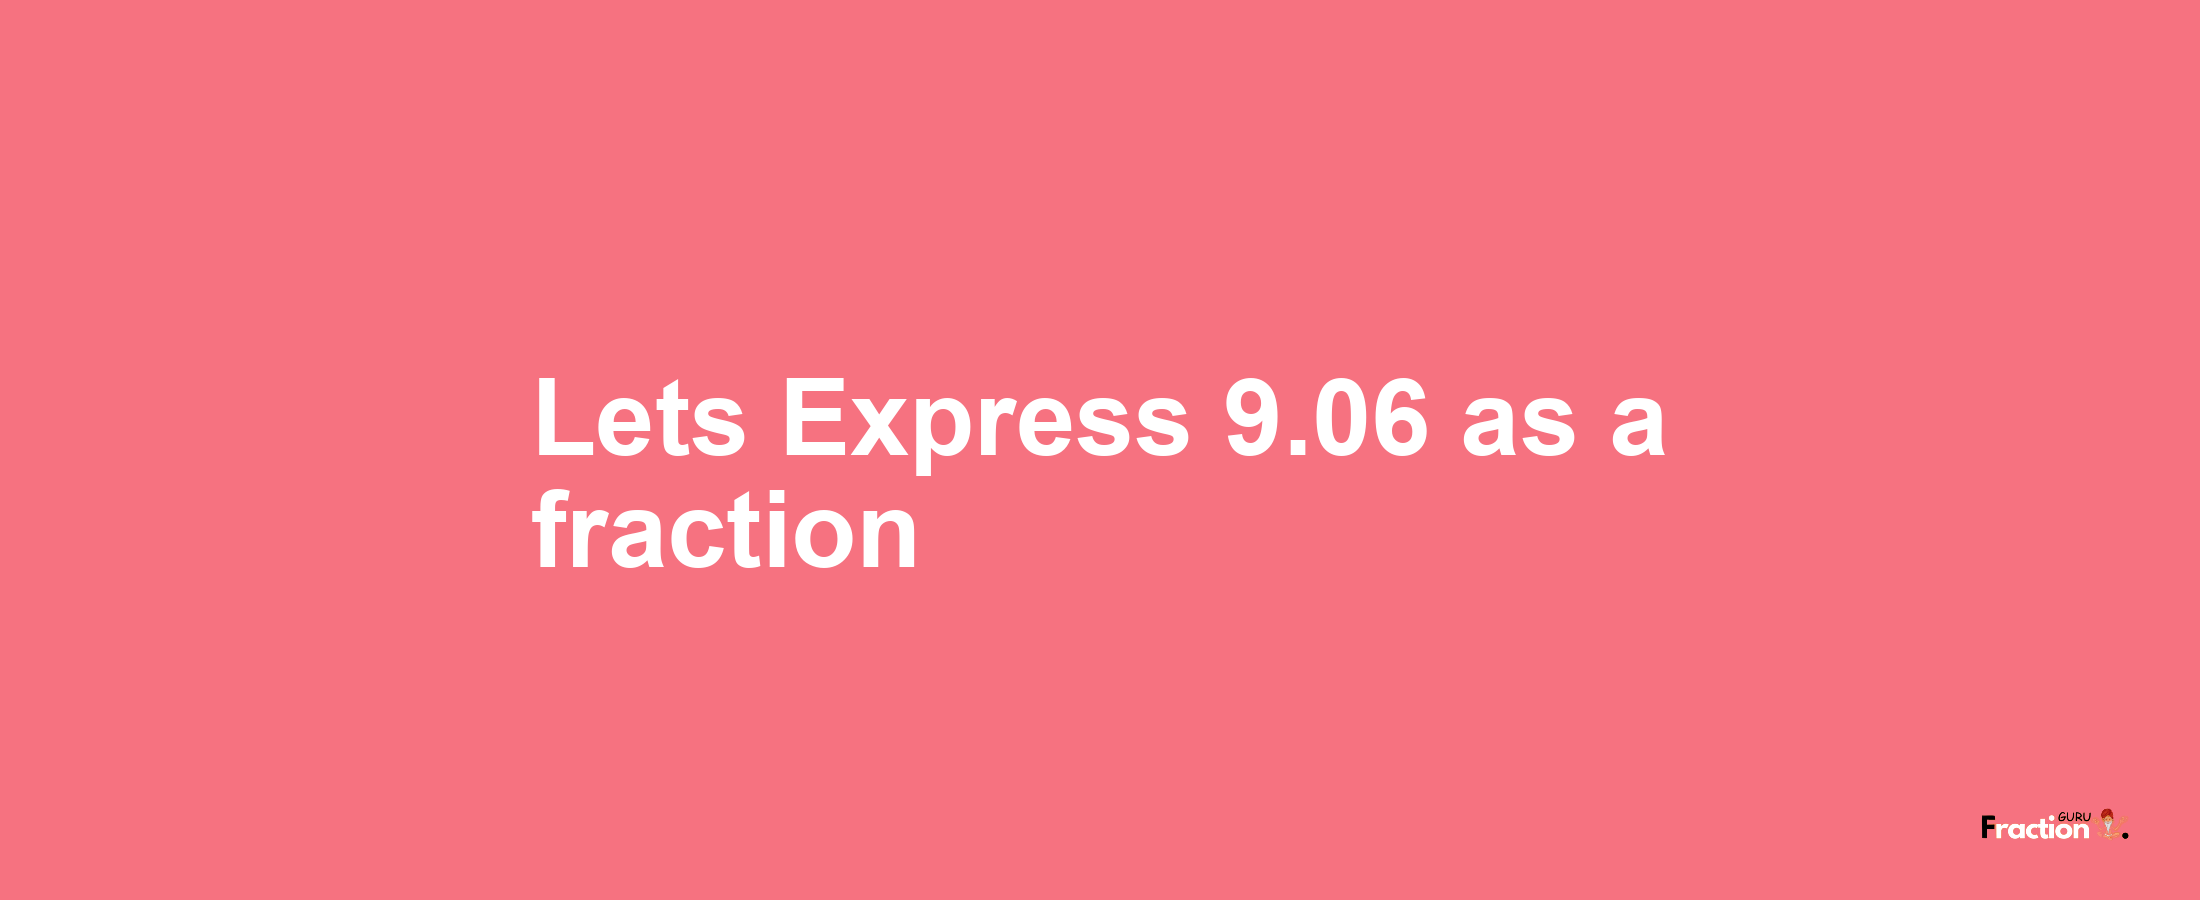 Lets Express 9.06 as afraction